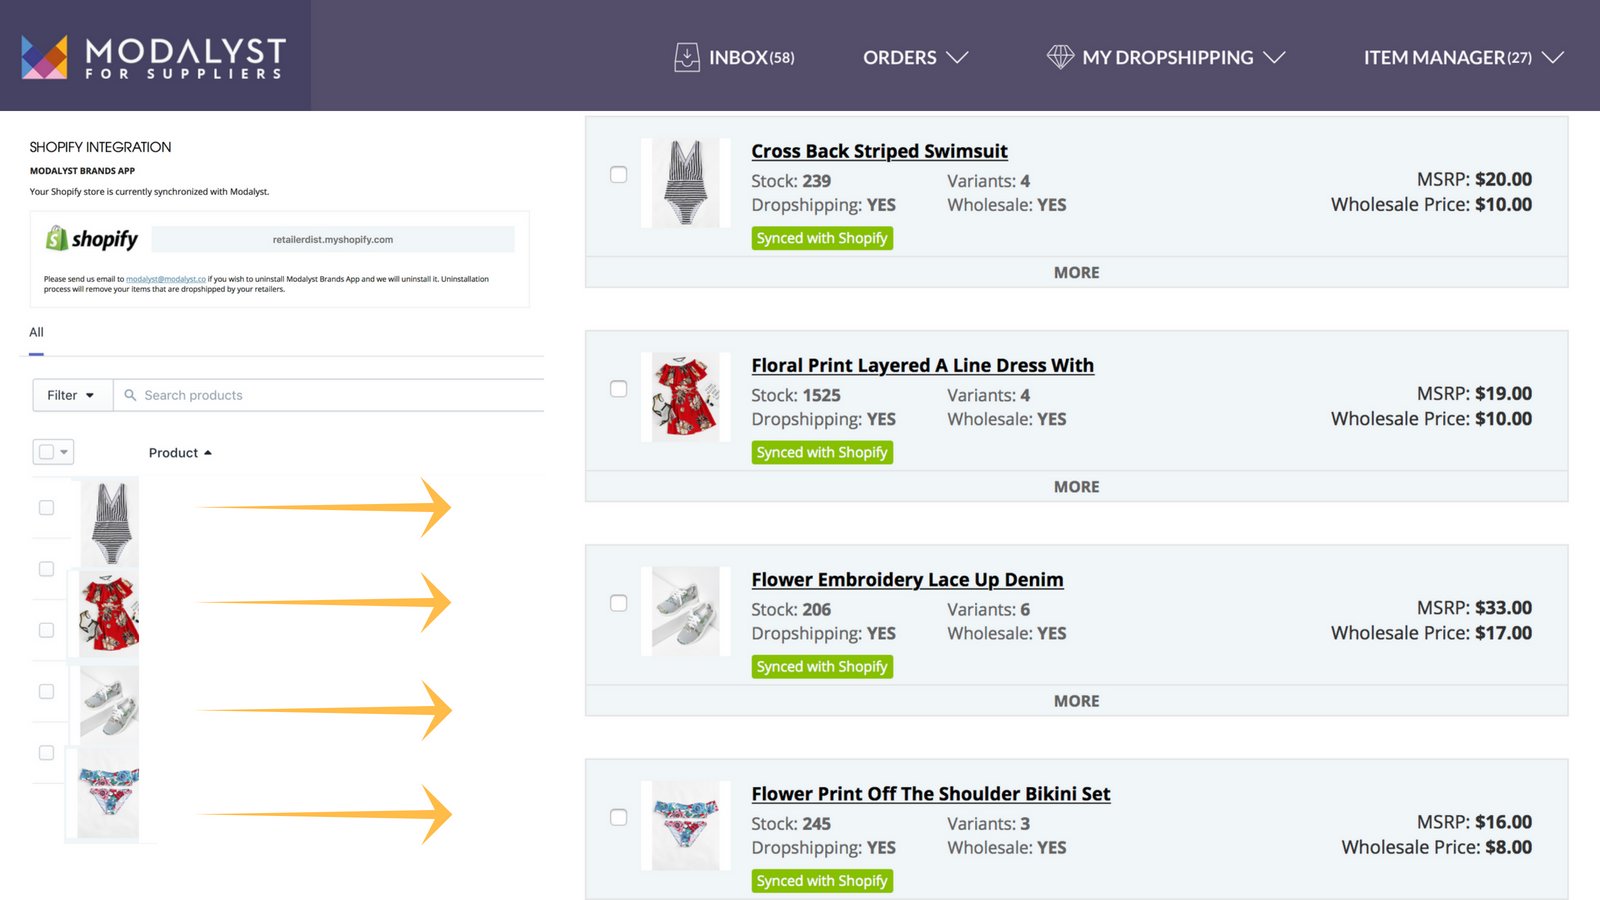 Product details, inventory and orders are synced with Shopify